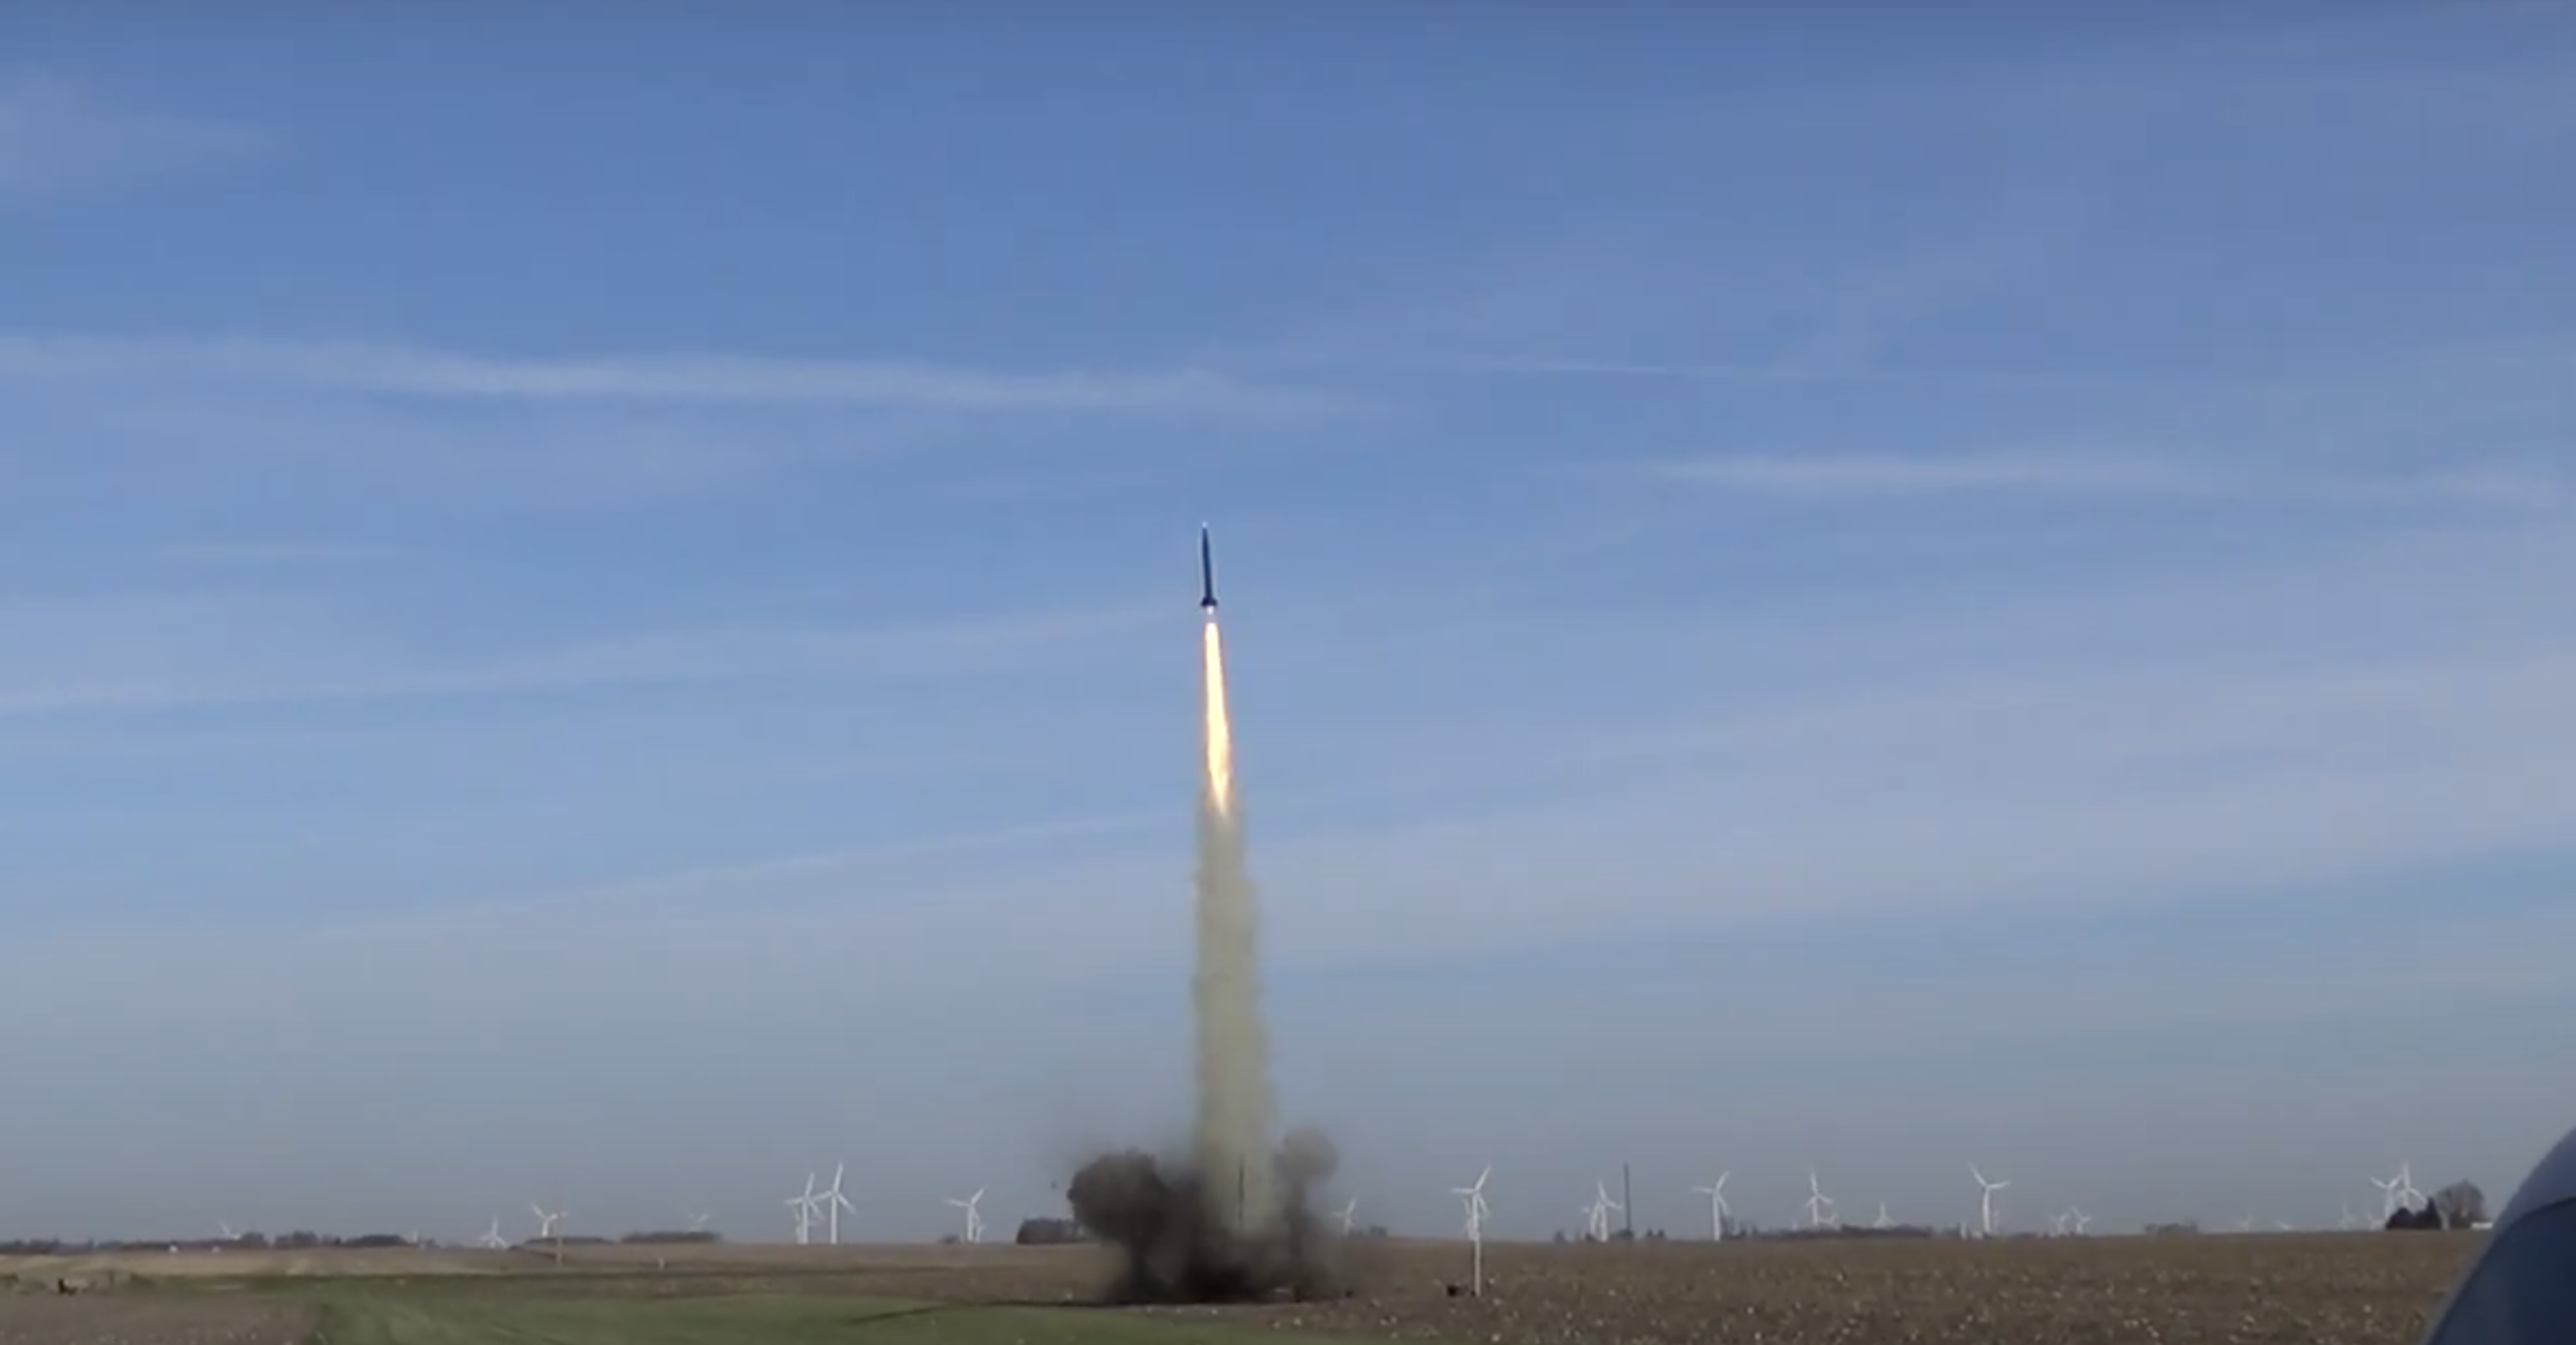 A screenshot of the takeoff of an 8-inch diameter rocket weighing roughly 100 pounds, that accelerated to Mach 2.3 in 1.48 seconds. Video by Chuck Haskin, Illinois